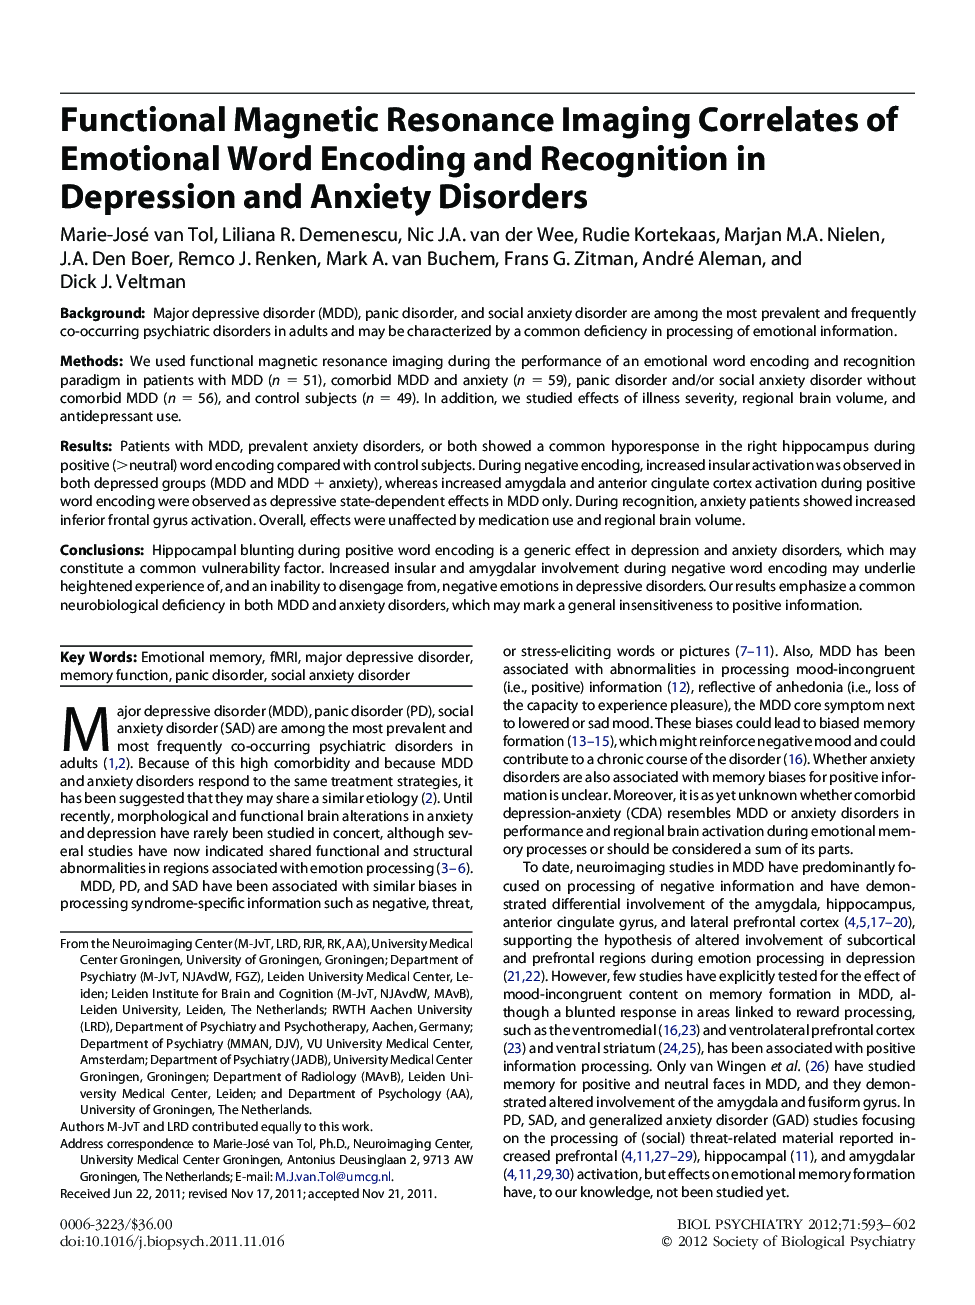 Functional Magnetic Resonance Imaging Correlates of Emotional Word Encoding and Recognition in Depression and Anxiety Disorders